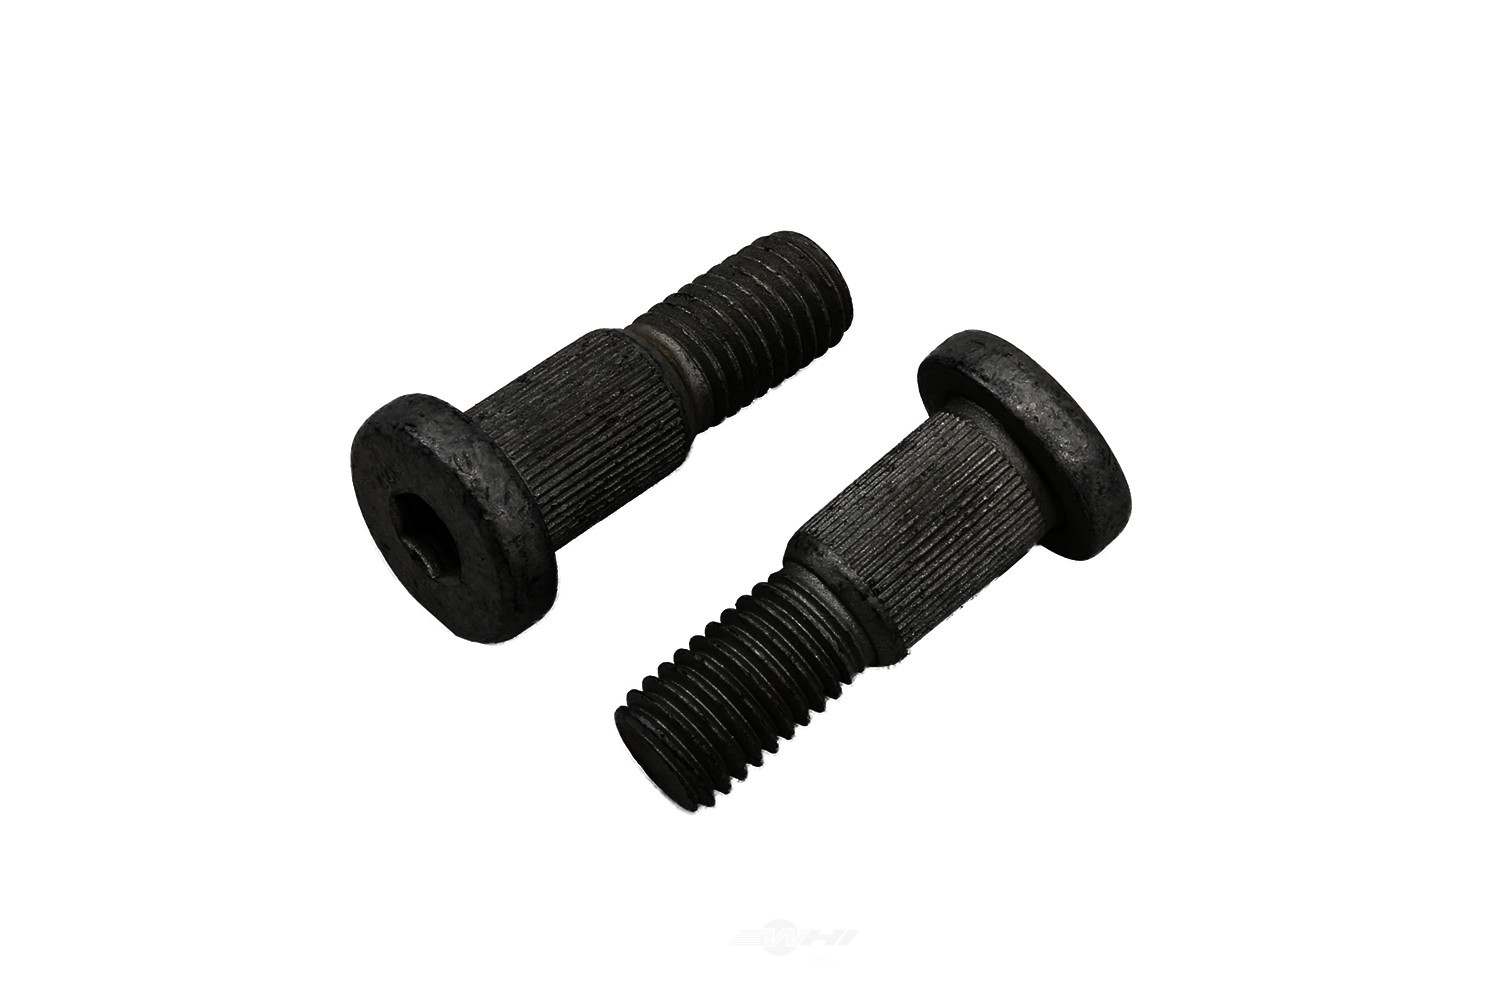 GM GENUINE PARTS CANADA - Steering King Pin Cap Bolt - GMC 13278765